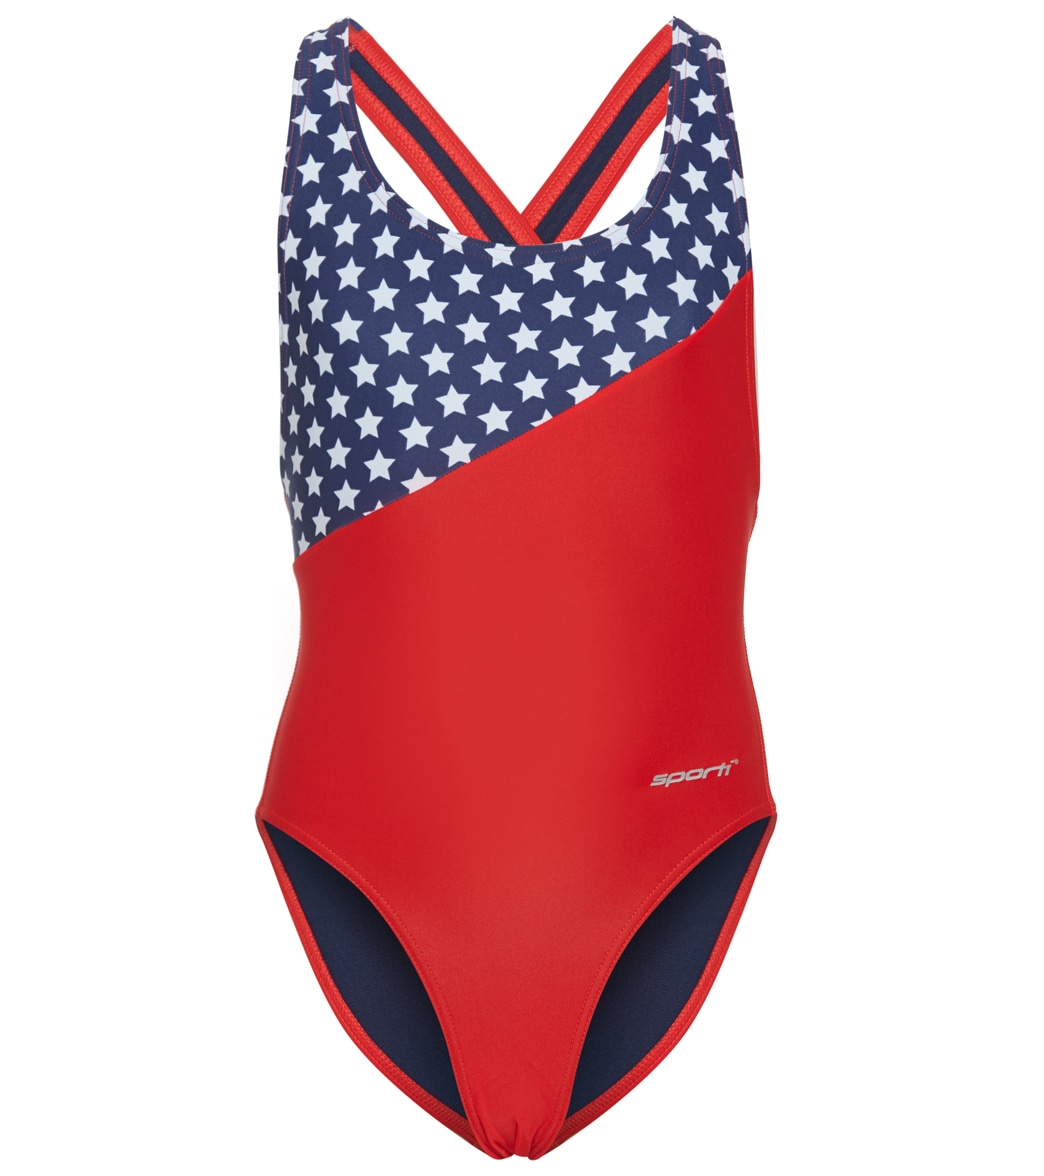 Sporti Star Spangled Wide Strap Cross Back One Piece Swimsuit Youth 22-28 - Red/White/Blue 24Y - Swimoutlet.com